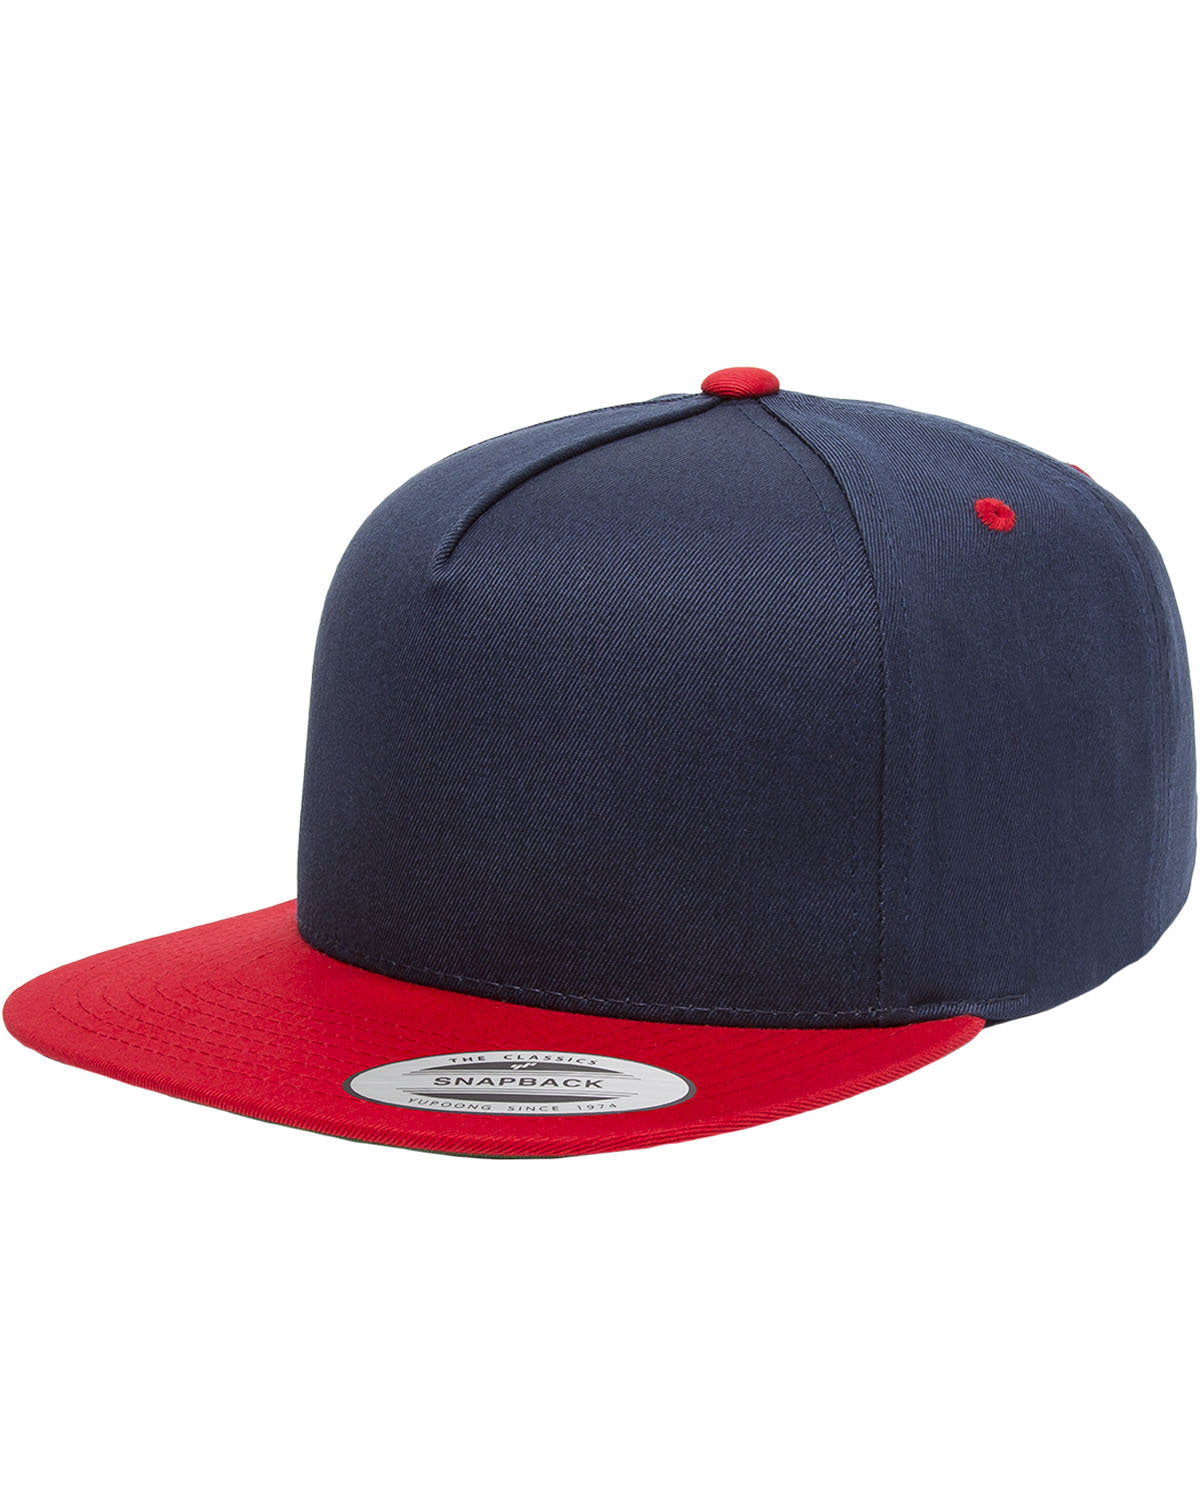 Headwear NAVY/ RED OS Yupoong